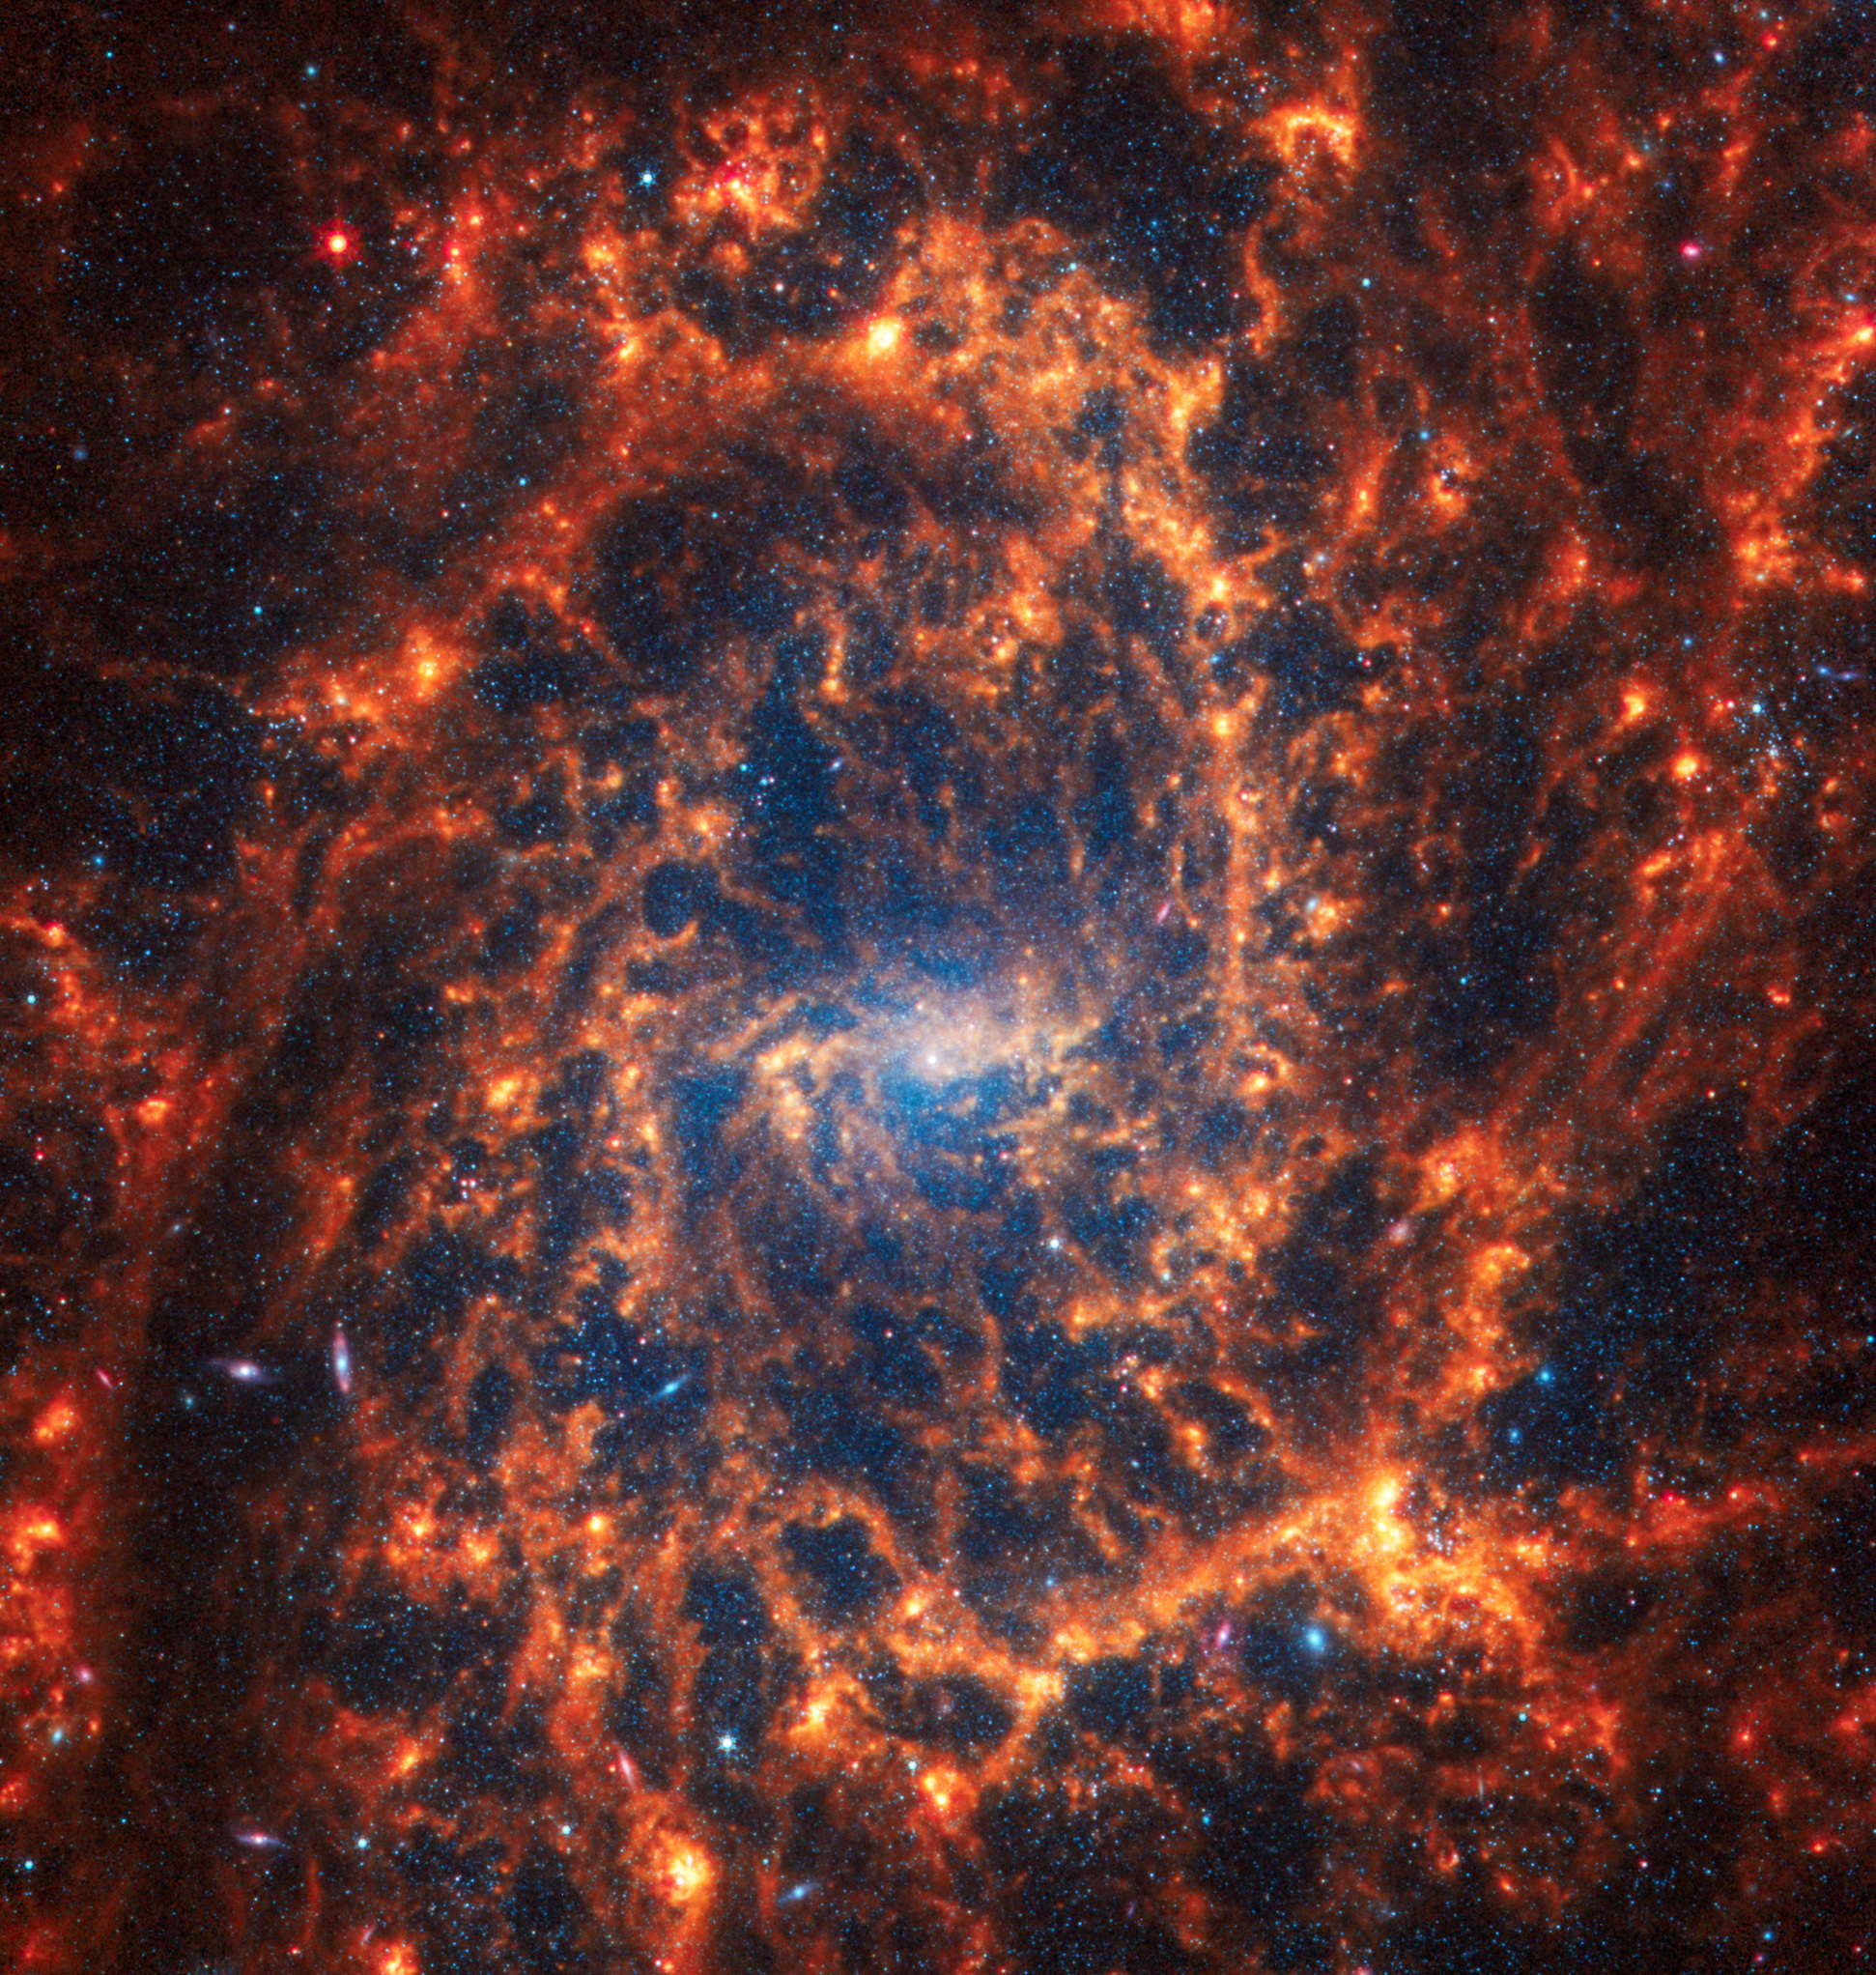 Spiral galaxy NGC 2835, located 35 million light-years away from Earth, is seen in an image from the James Webb Space Telescope